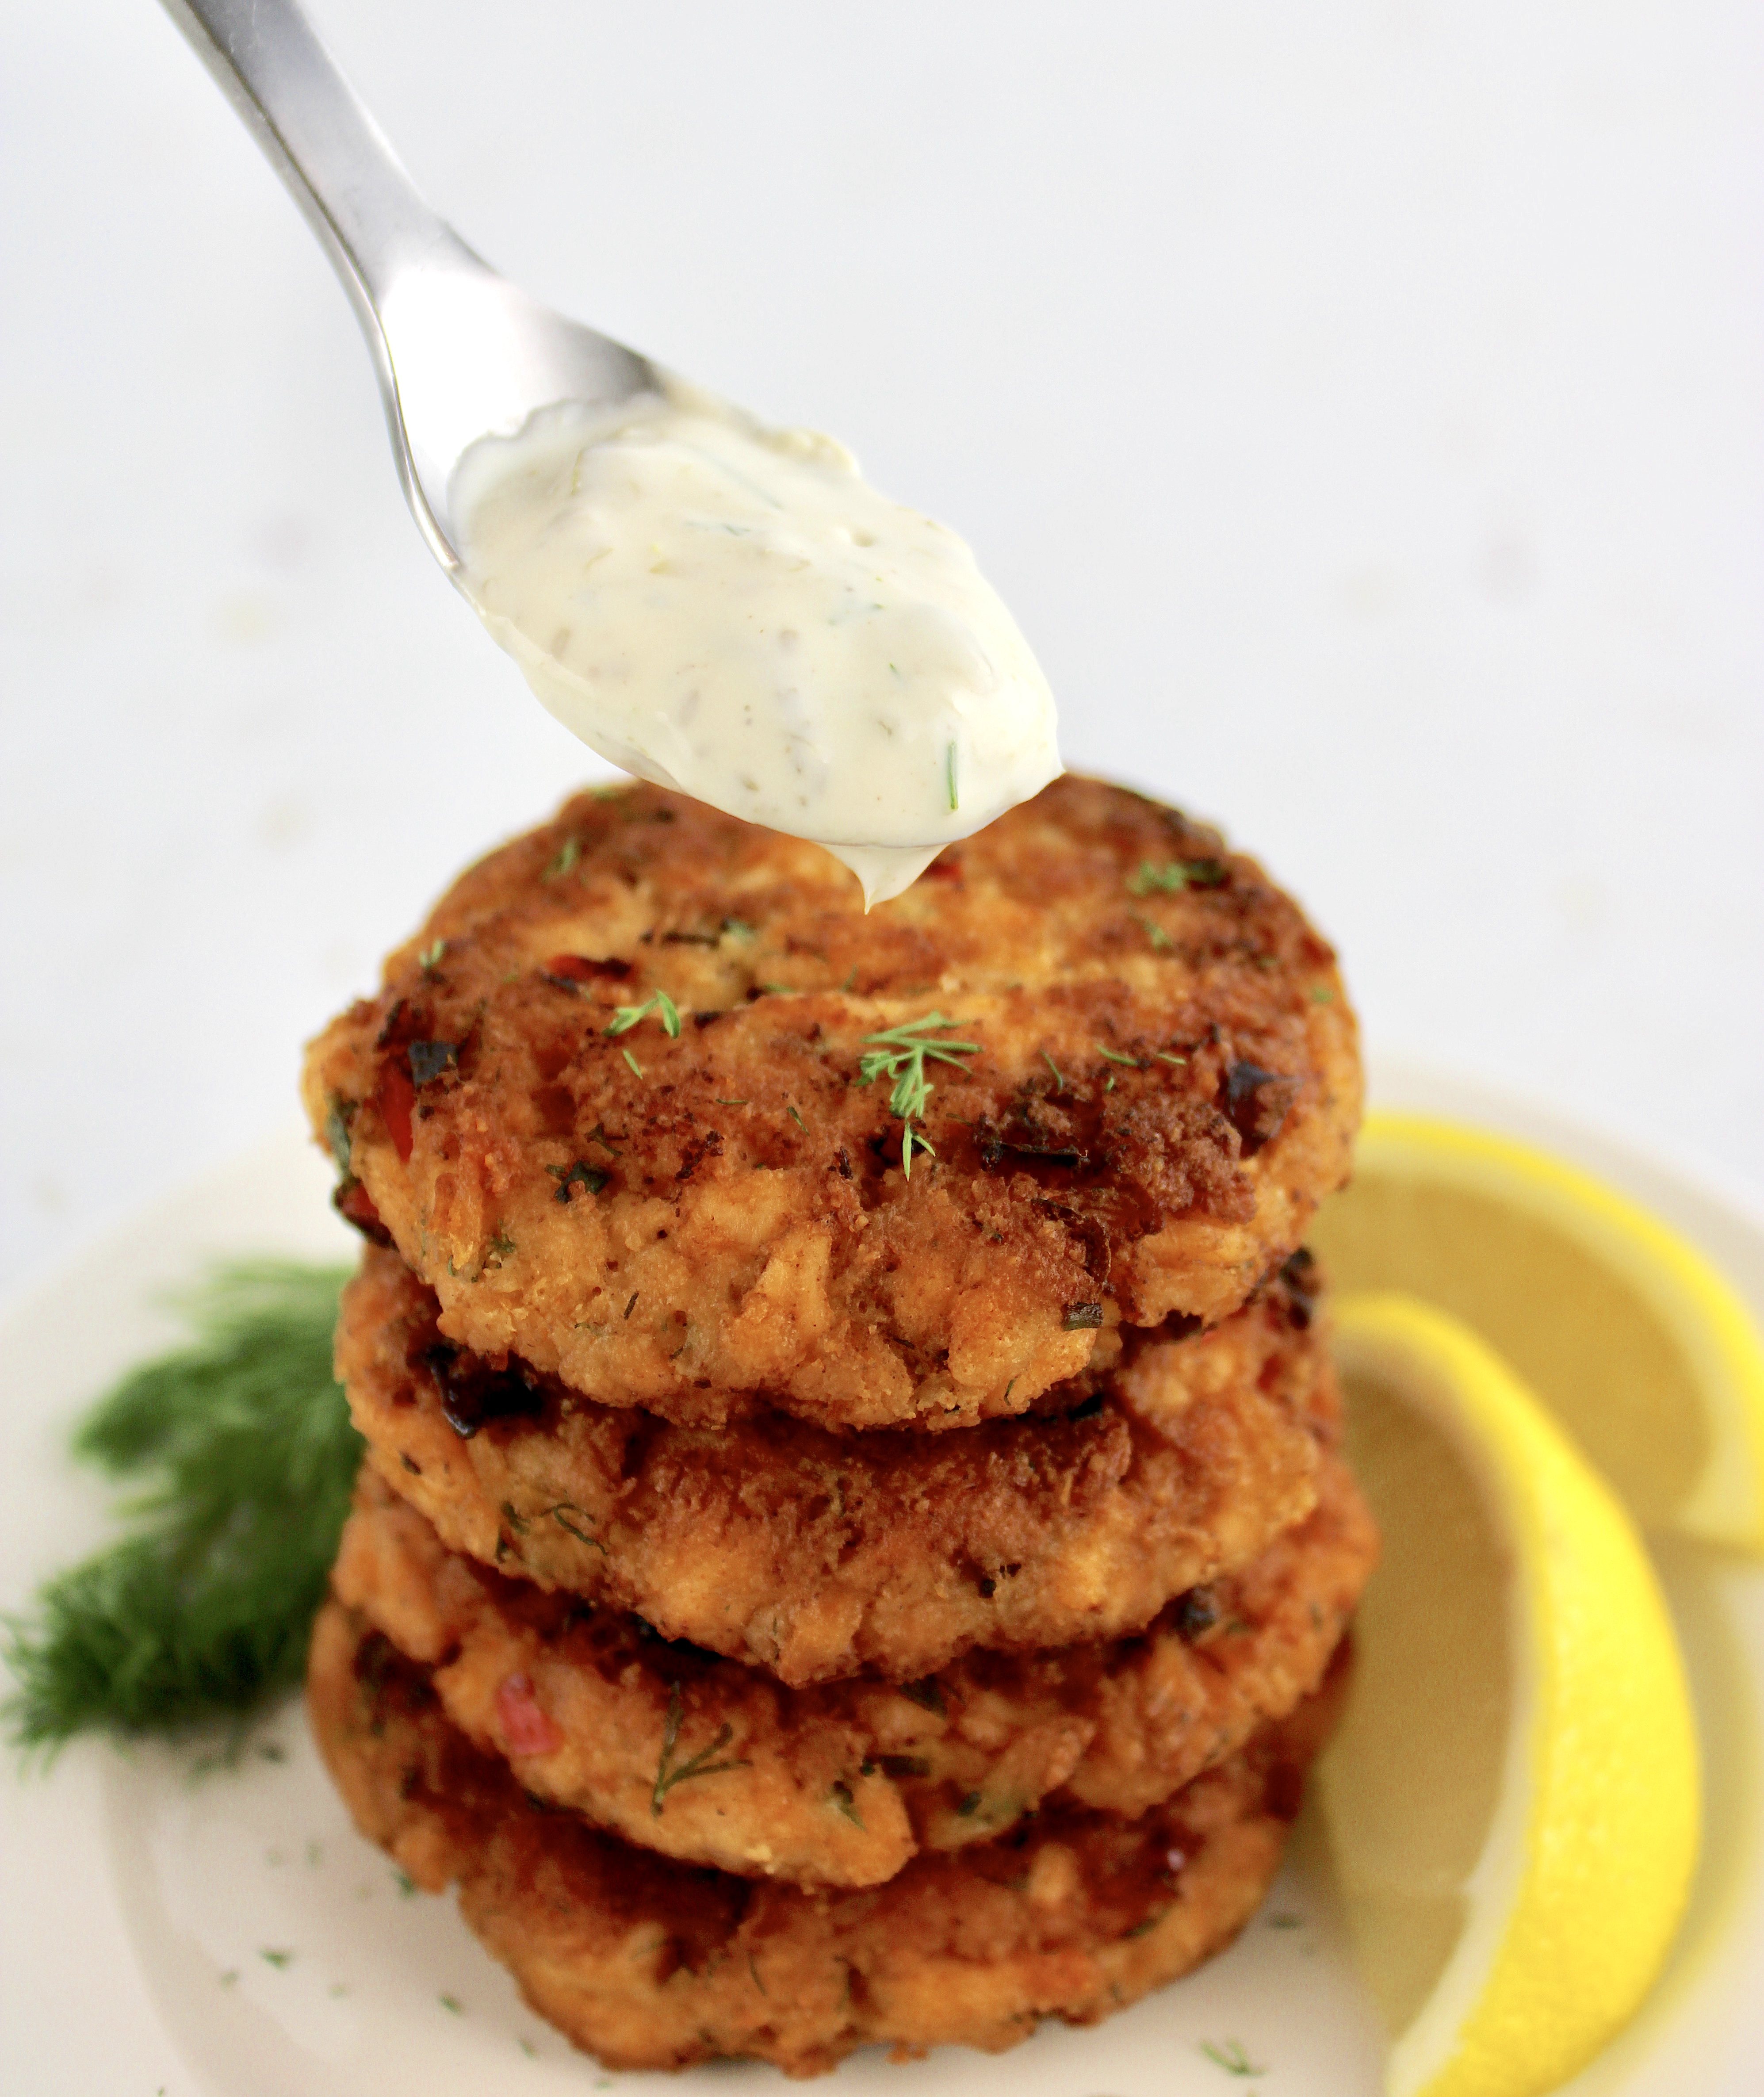 stack of 4 salmon patties with dill sauce being spooned over the top